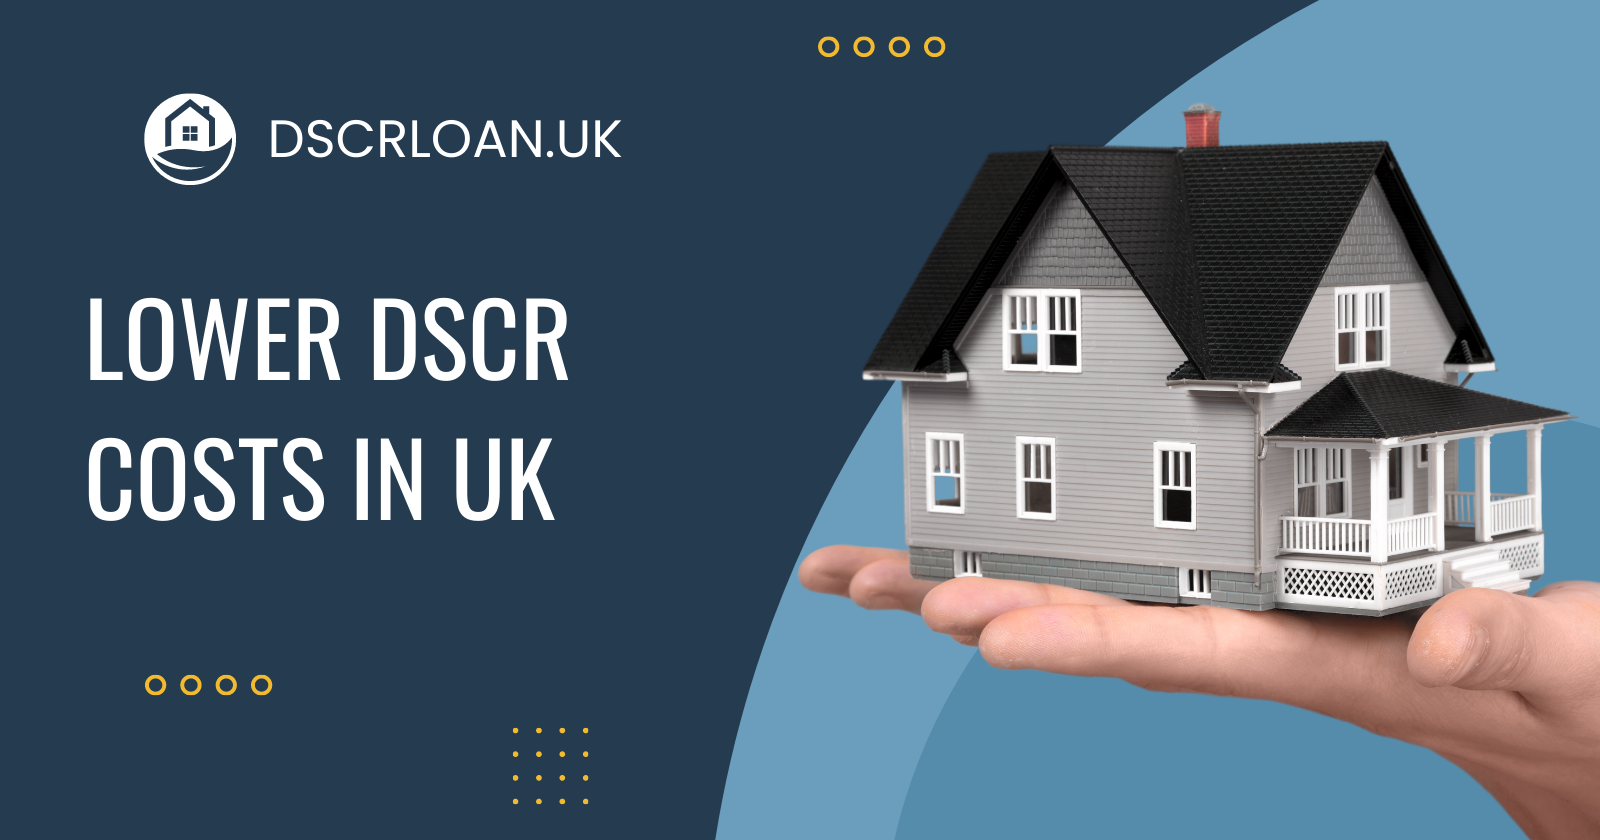 why dscr costs are lower in uk